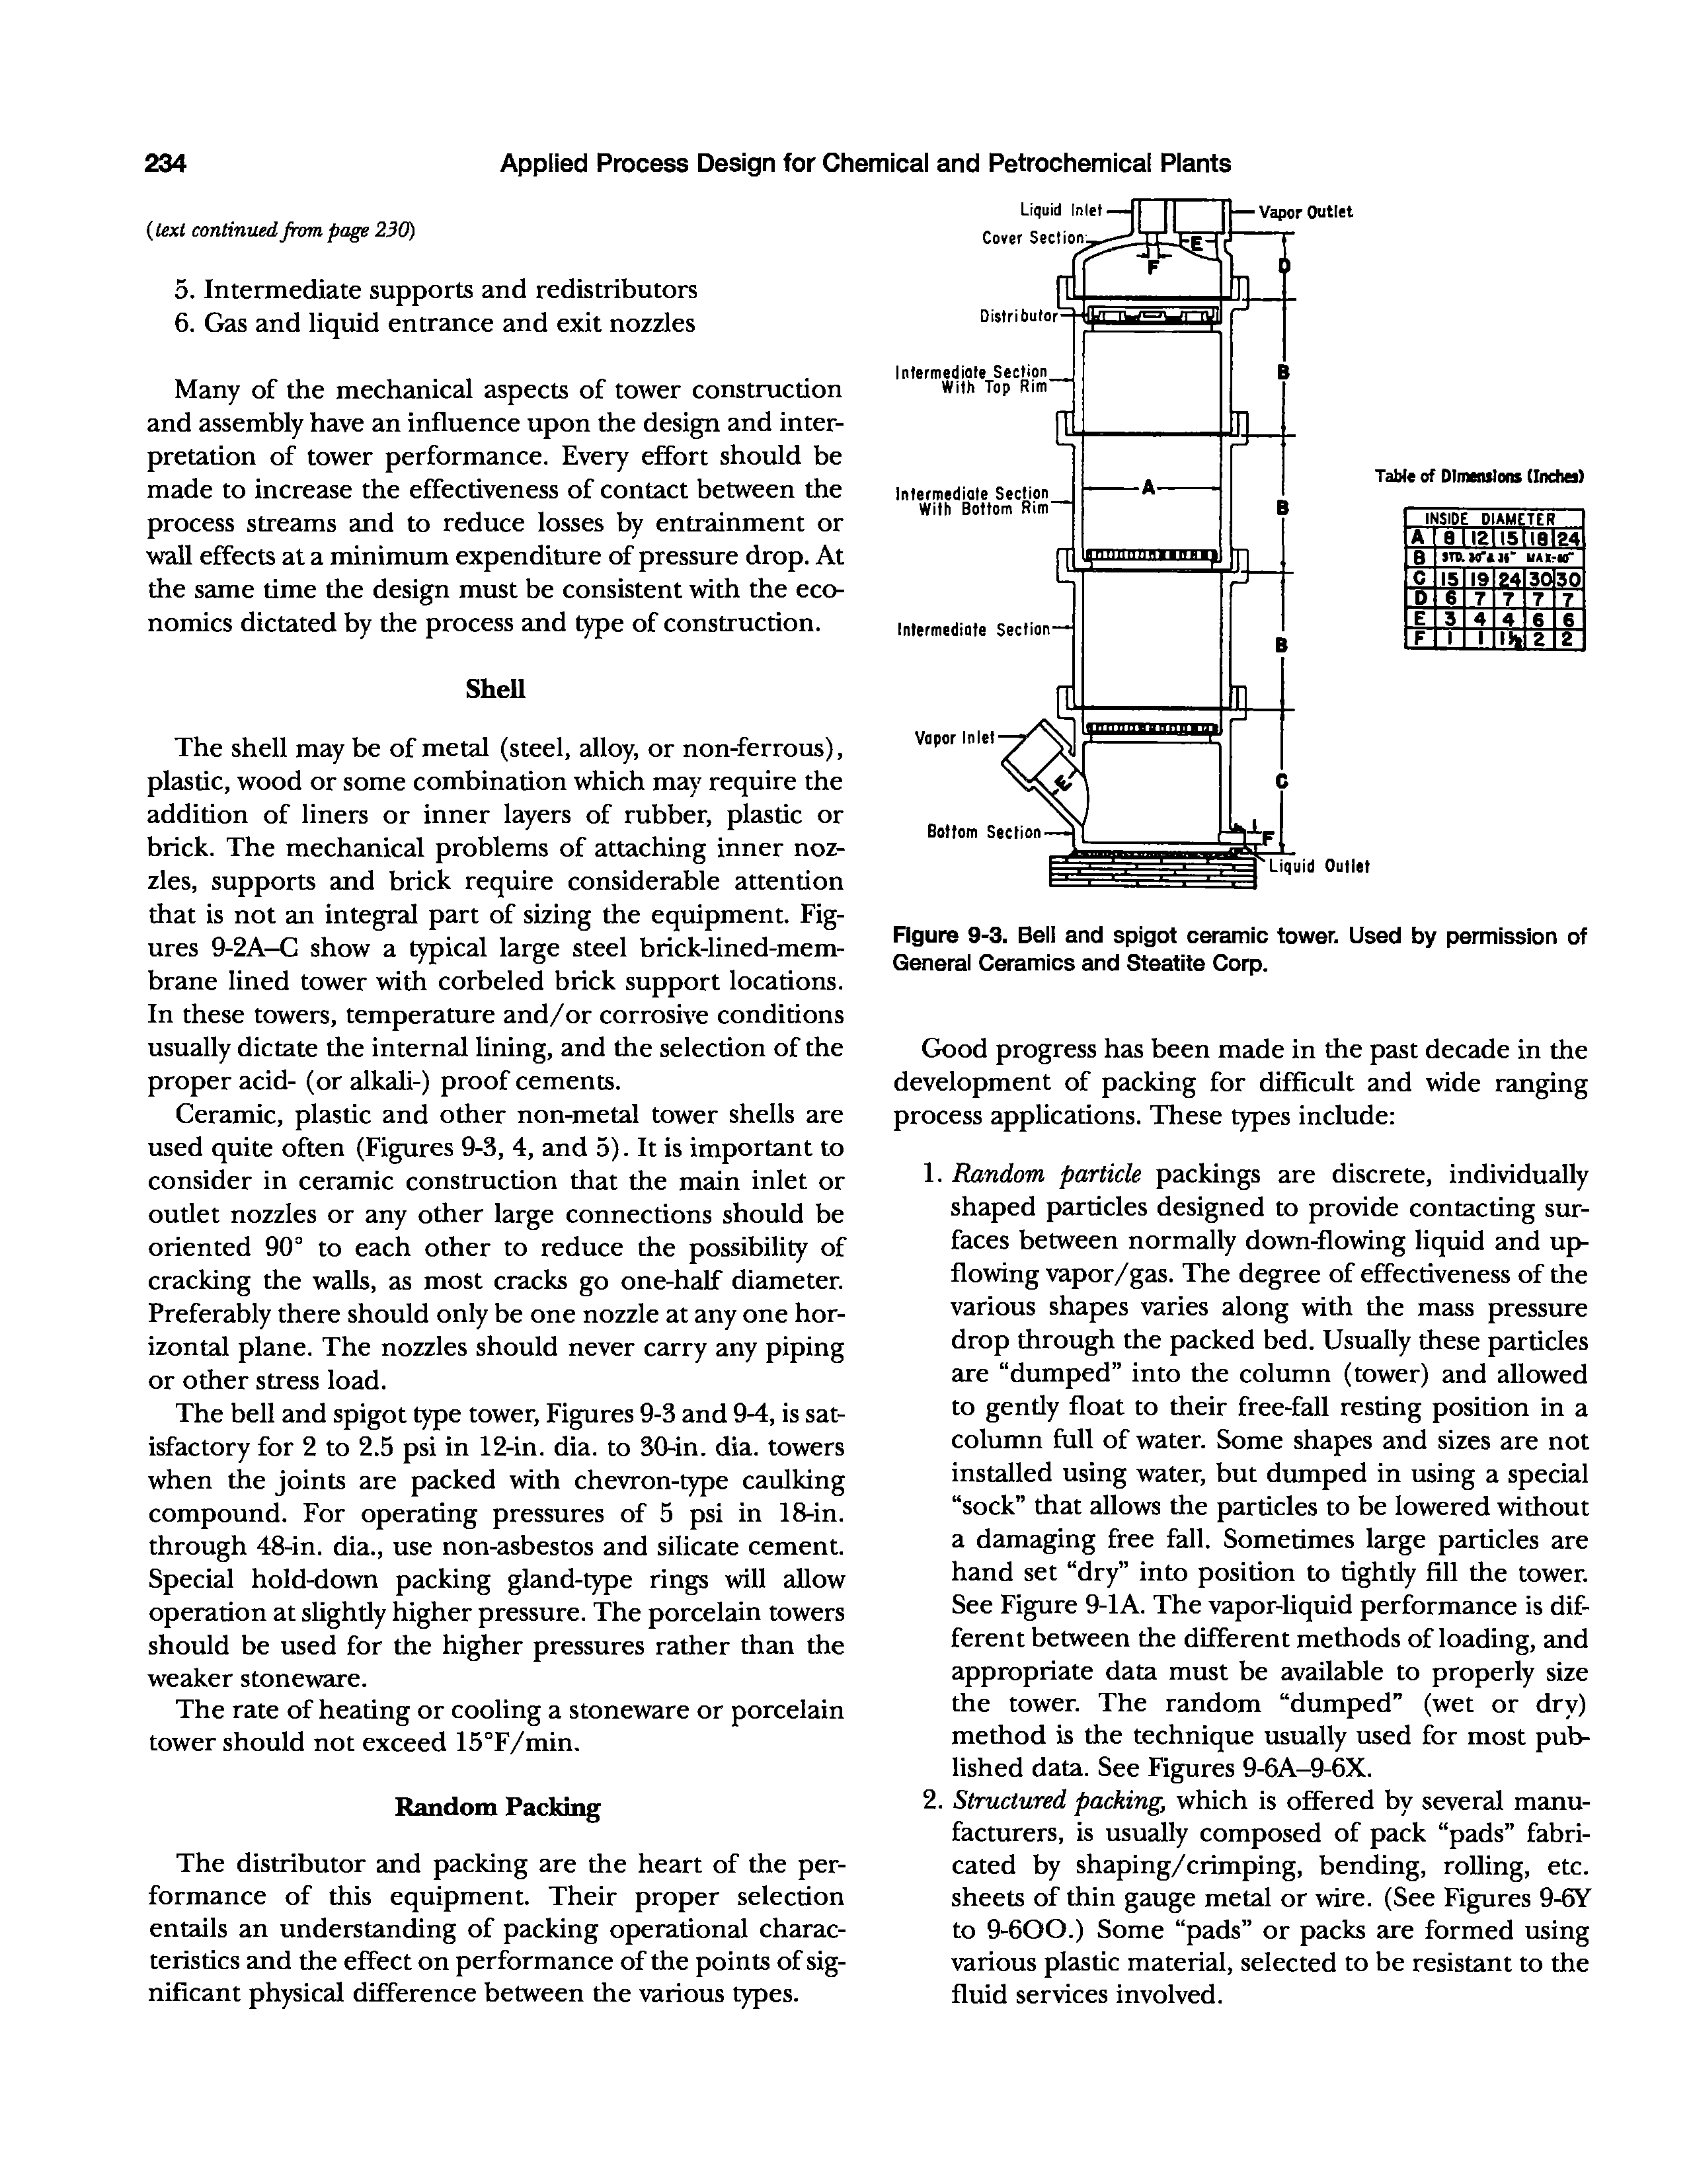 Figure 9-3. Bell and spigot ceramic tower. Used by permission of General Ceramics and Steatite Corp.